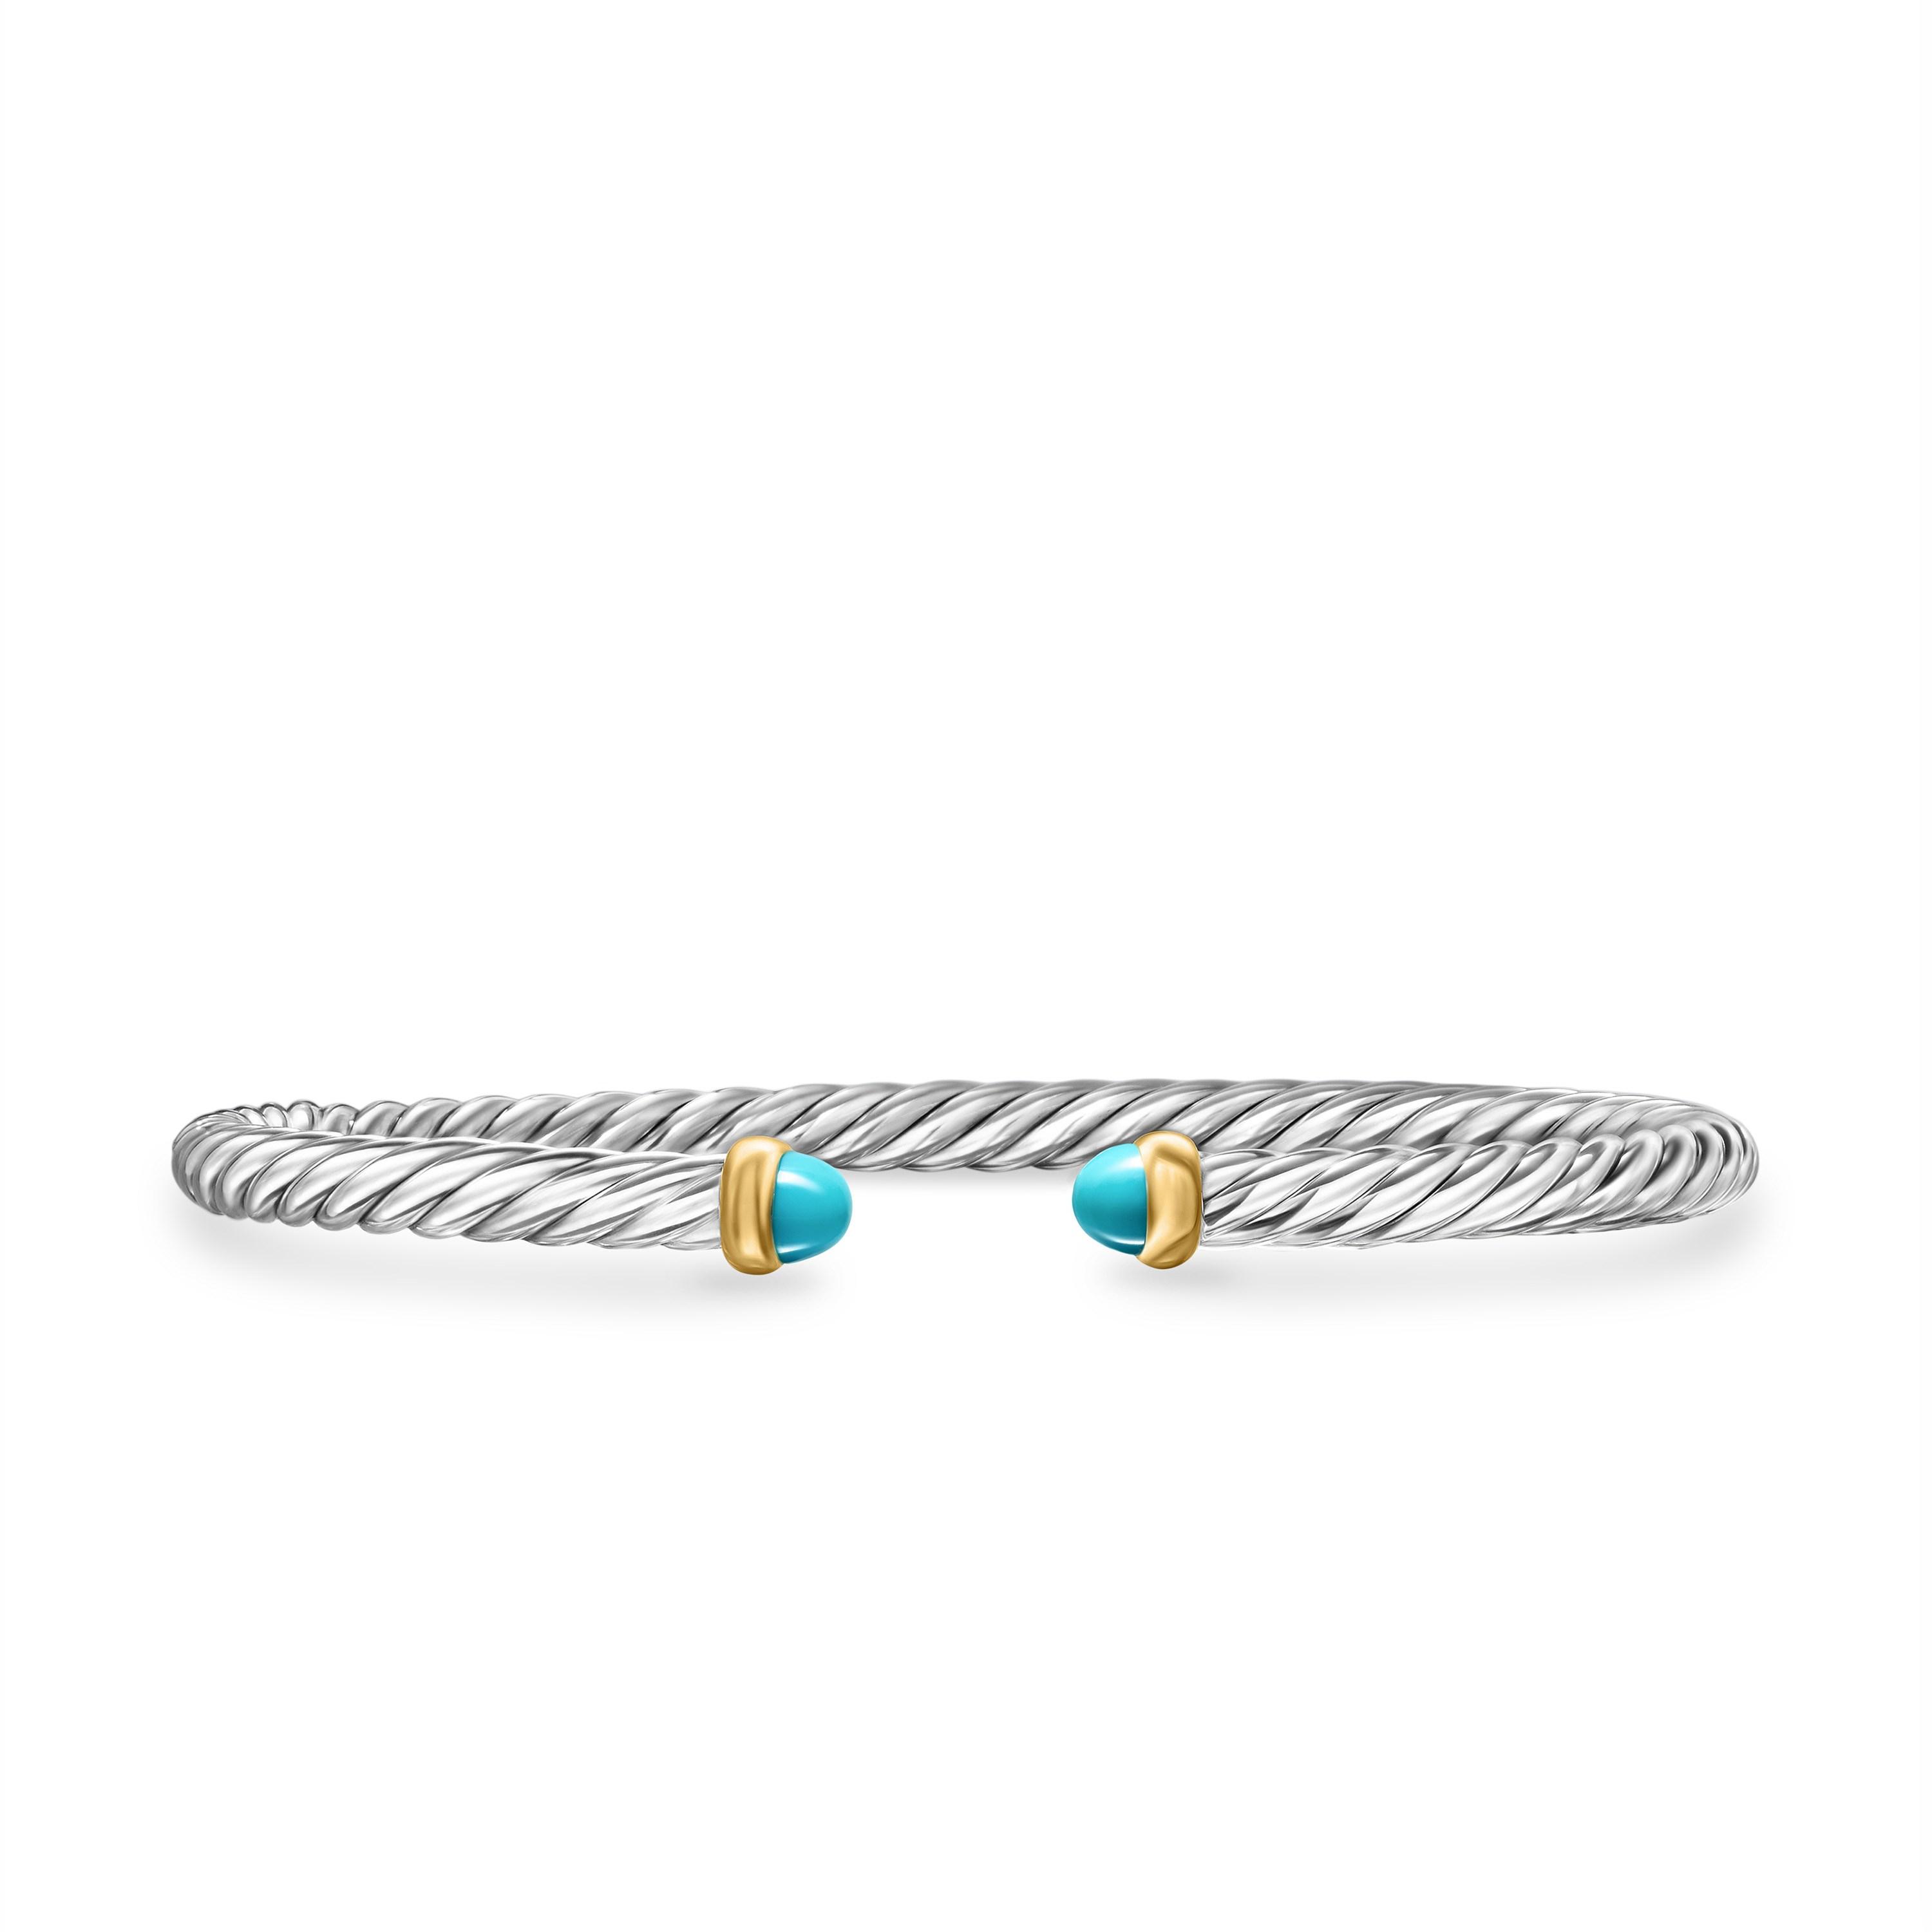 David Yurman Cable Flex Sterling Silver Bracelet with Turquoise, Size Small